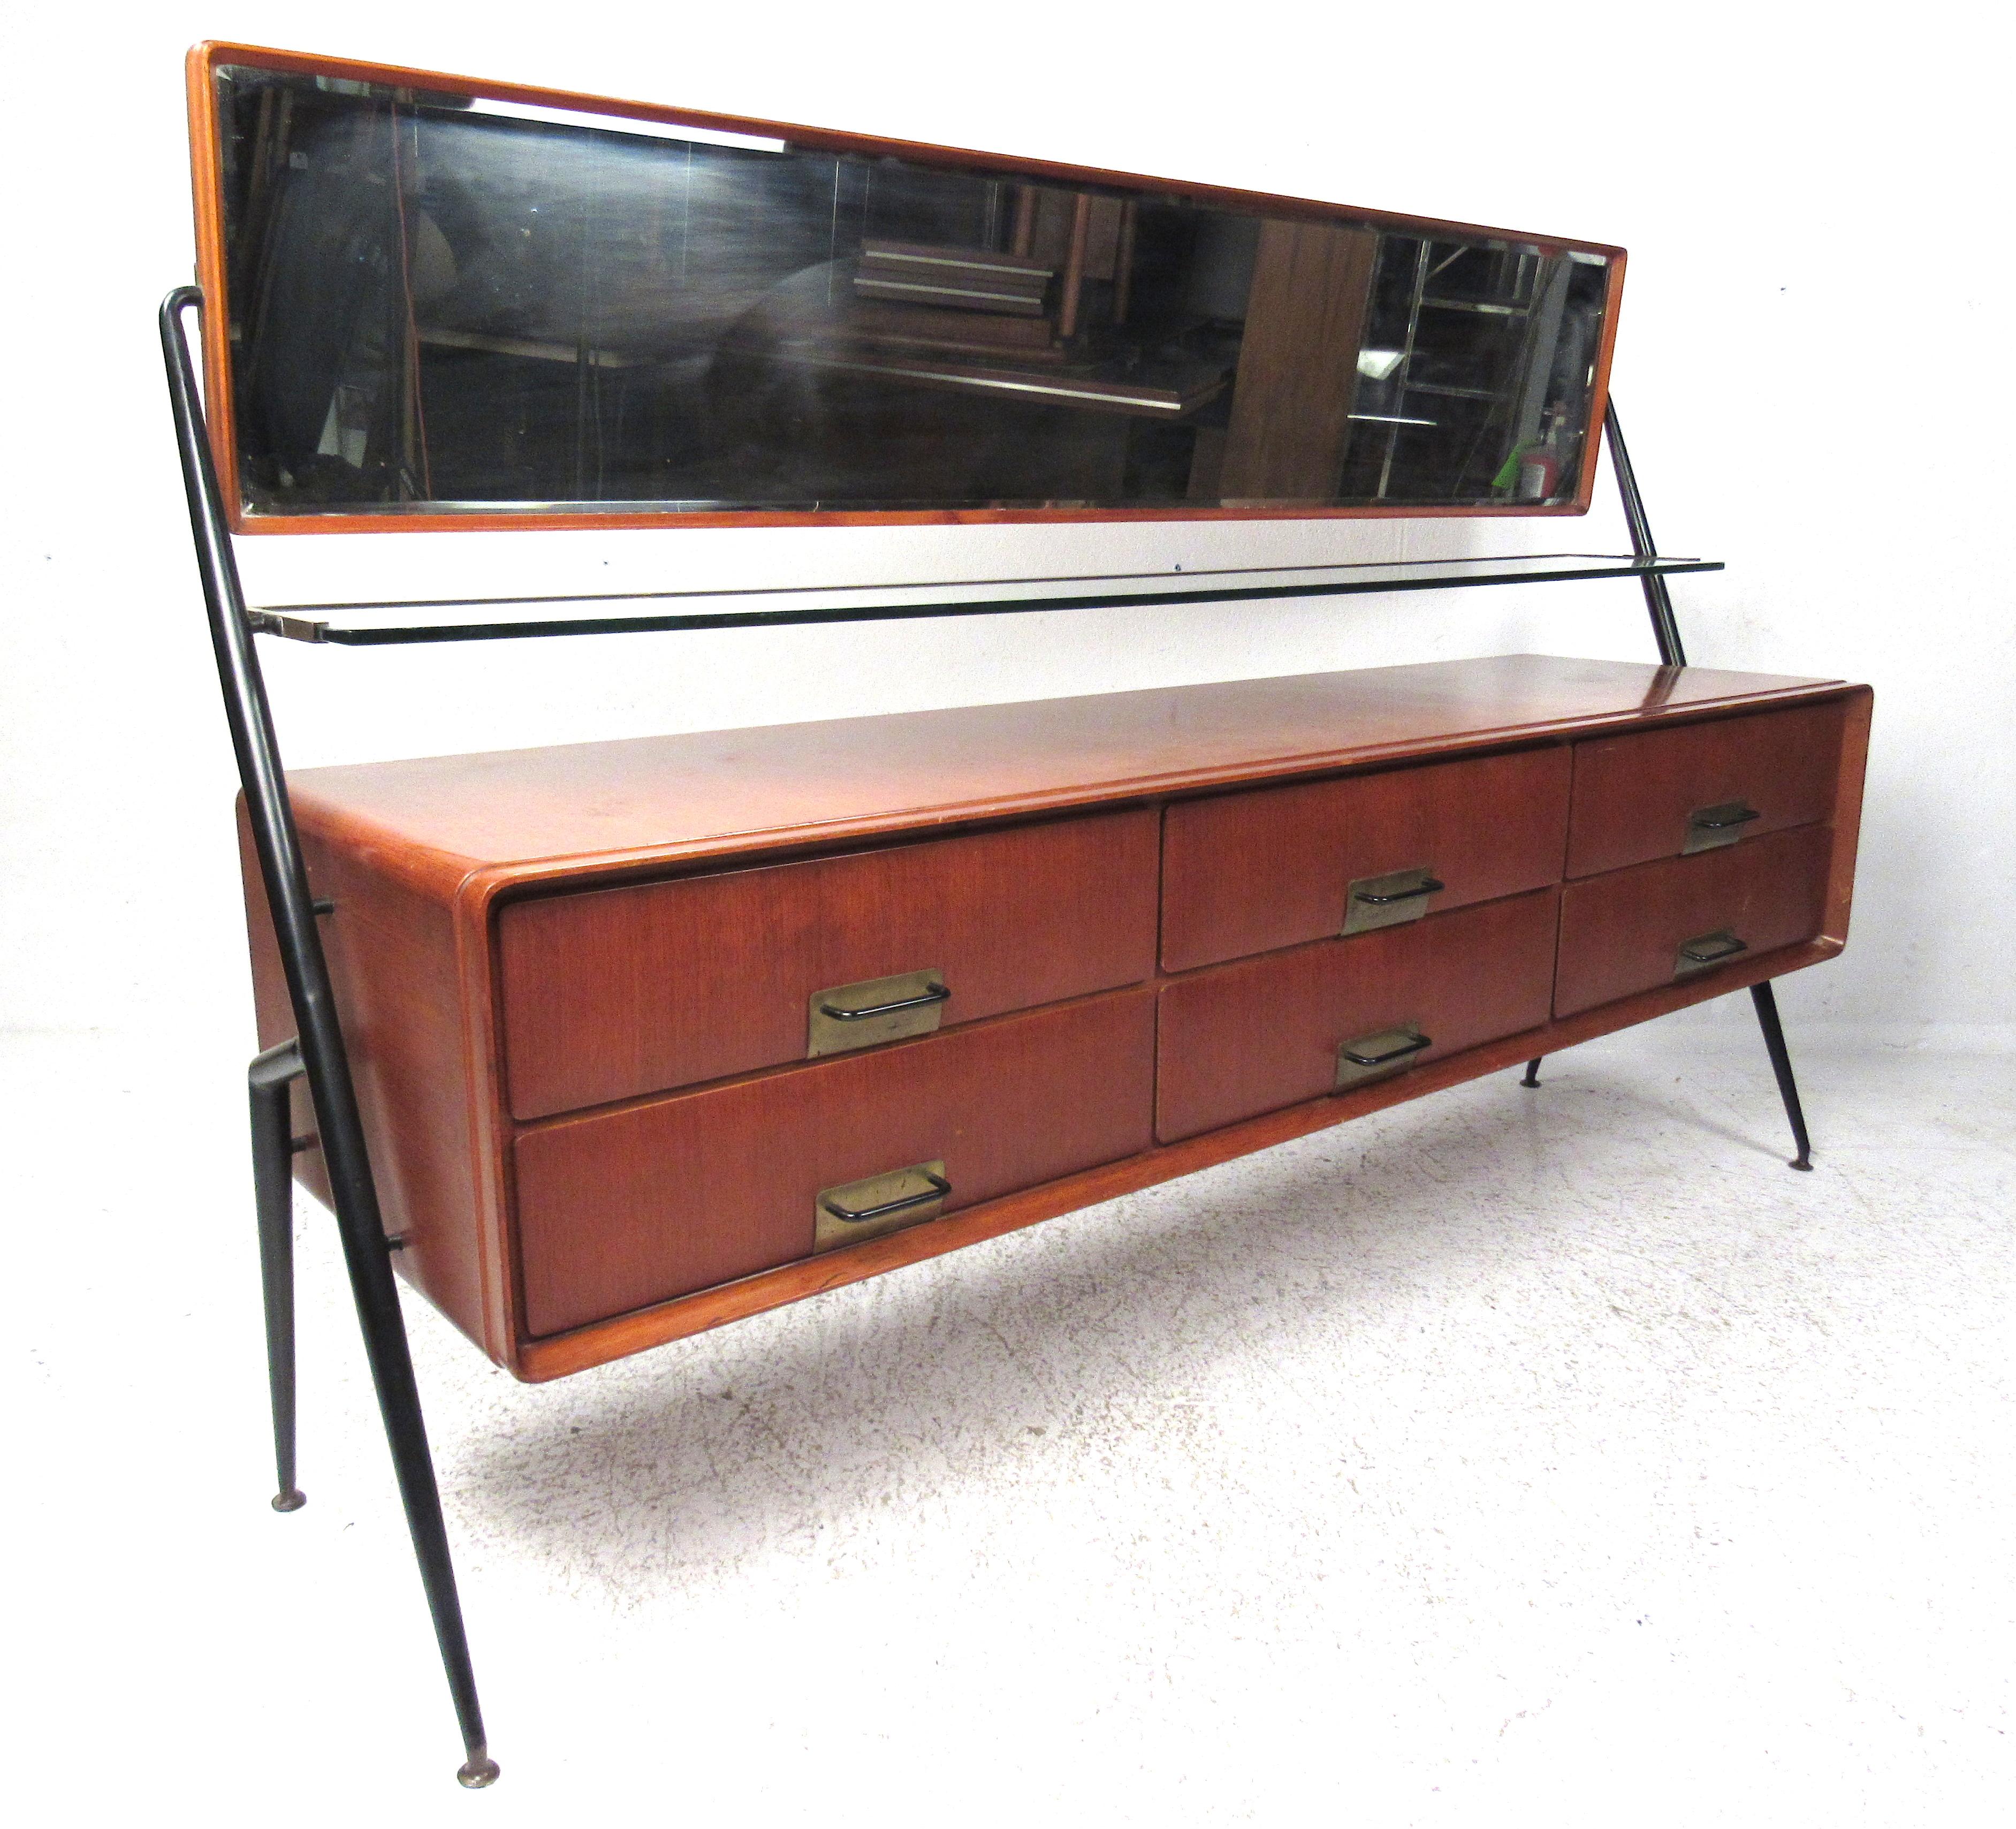 Silvio Cavatorta mahogany cabinet with six drawers, horizontal tilting mirror, and glass shelf with brass trim.
All supported by angular steel legs with brass feet, circa 1960s.